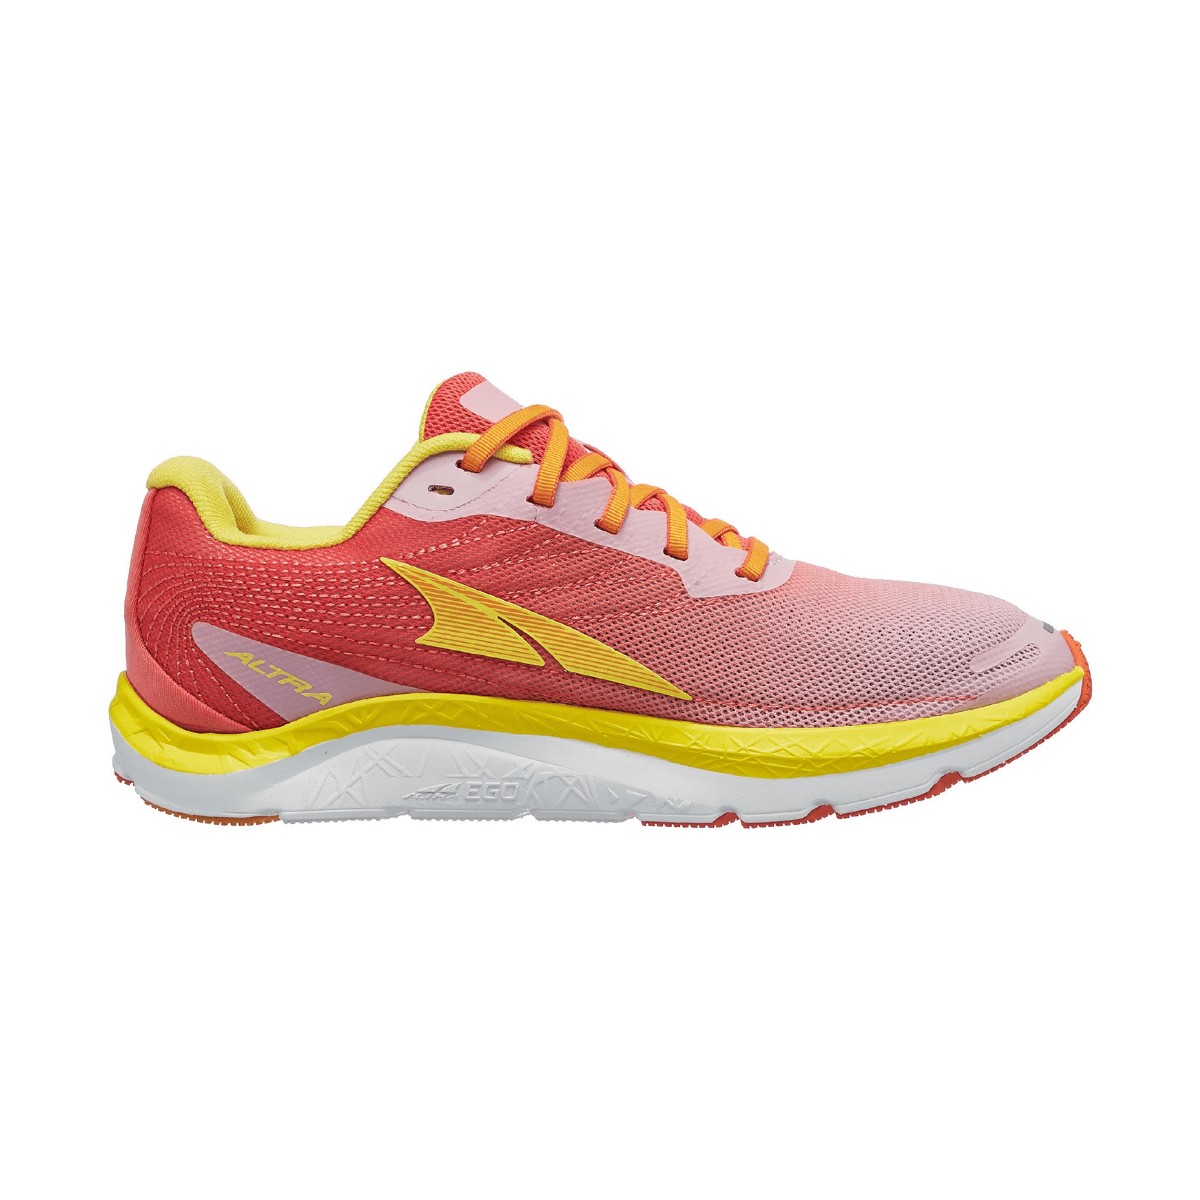 Chaussures Altra Rivera 2 Jaune Corail Femme SS22, Taille 38 - EUR